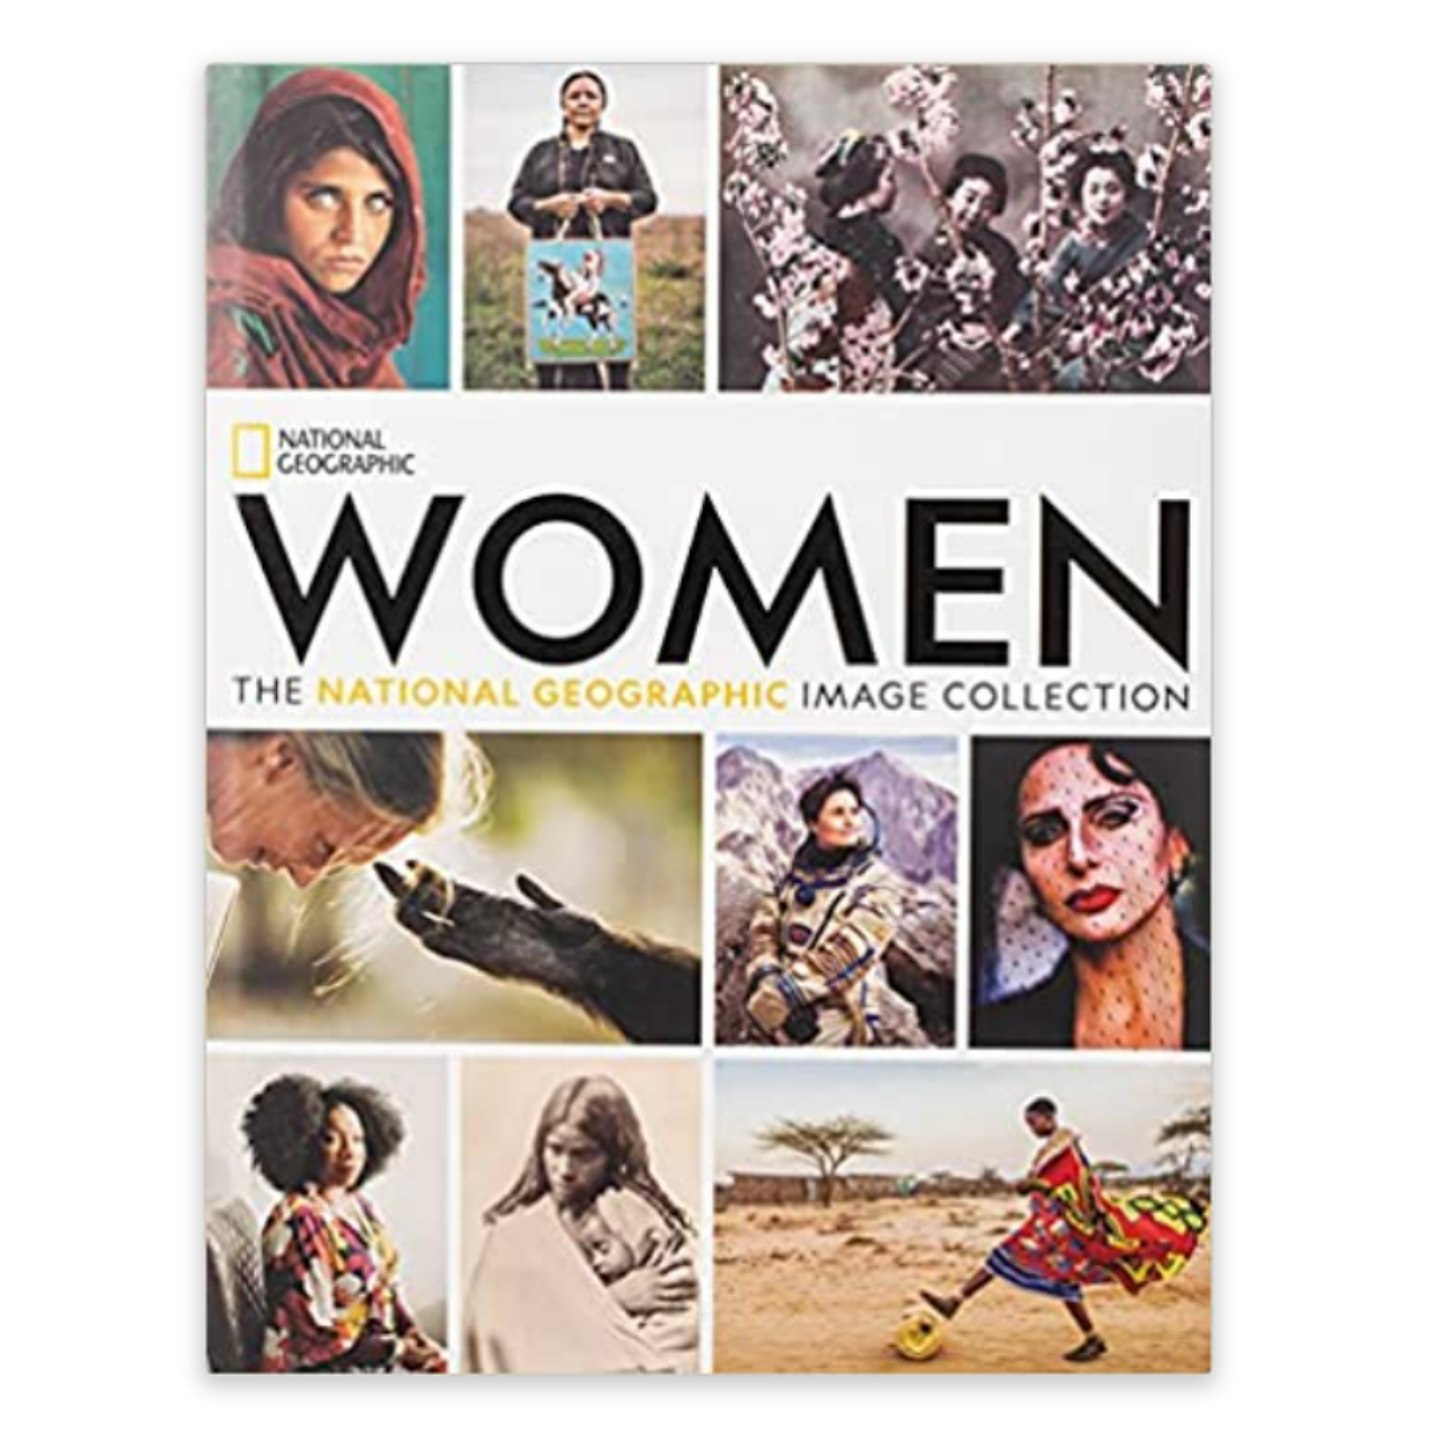 Women: The National Geographic Image Collection, £20.70